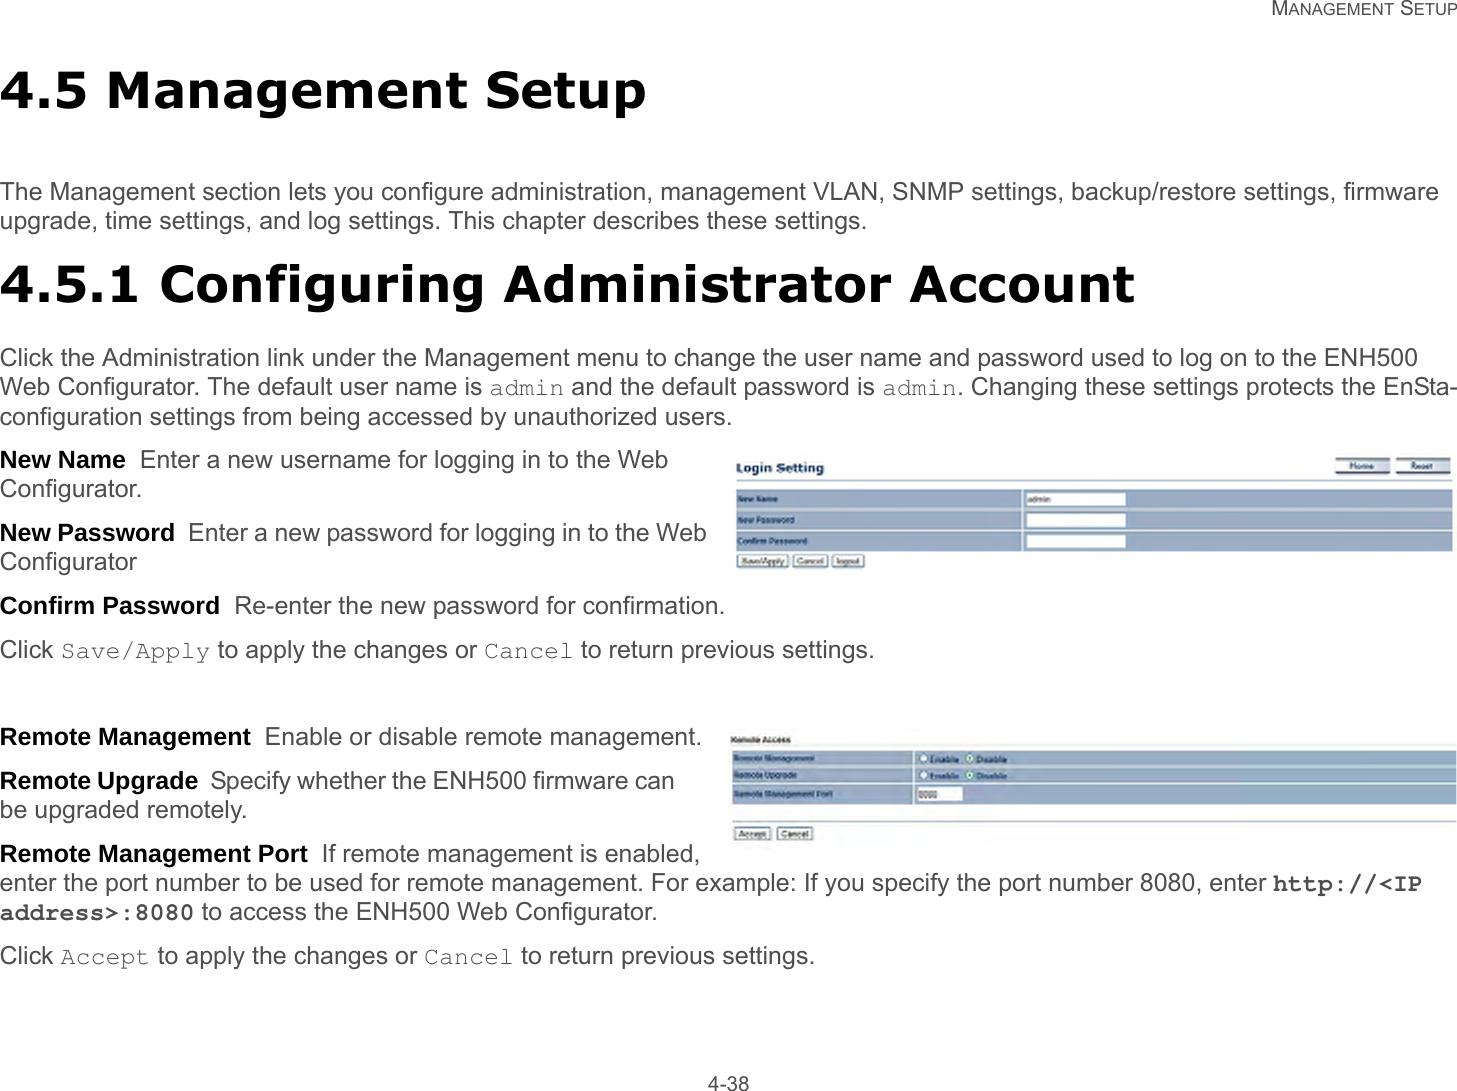   MANAGEMENT SETUP 4-384.5 Management SetupThe Management section lets you configure administration, management VLAN, SNMP settings, backup/restore settings, firmware upgrade, time settings, and log settings. This chapter describes these settings.4.5.1 Configuring Administrator AccountClick the Administration link under the Management menu to change the user name and password used to log on to the ENH500 Web Configurator. The default user name is admin and the default password is admin. Changing these settings protects the EnSta-configuration settings from being accessed by unauthorized users.New Name  Enter a new username for logging in to the Web Configurator.New Password  Enter a new password for logging in to the Web ConfiguratorConfirm Password  Re-enter the new password for confirmation.Click Save/Apply to apply the changes or Cancel to return previous settings.Remote Management  Enable or disable remote management.Remote Upgrade  Specify whether the ENH500 firmware can be upgraded remotely.Remote Management Port  If remote management is enabled, enter the port number to be used for remote management. For example: If you specify the port number 8080, enter http://&lt;IP address&gt;:8080 to access the ENH500 Web Configurator.Click Accept to apply the changes or Cancel to return previous settings.